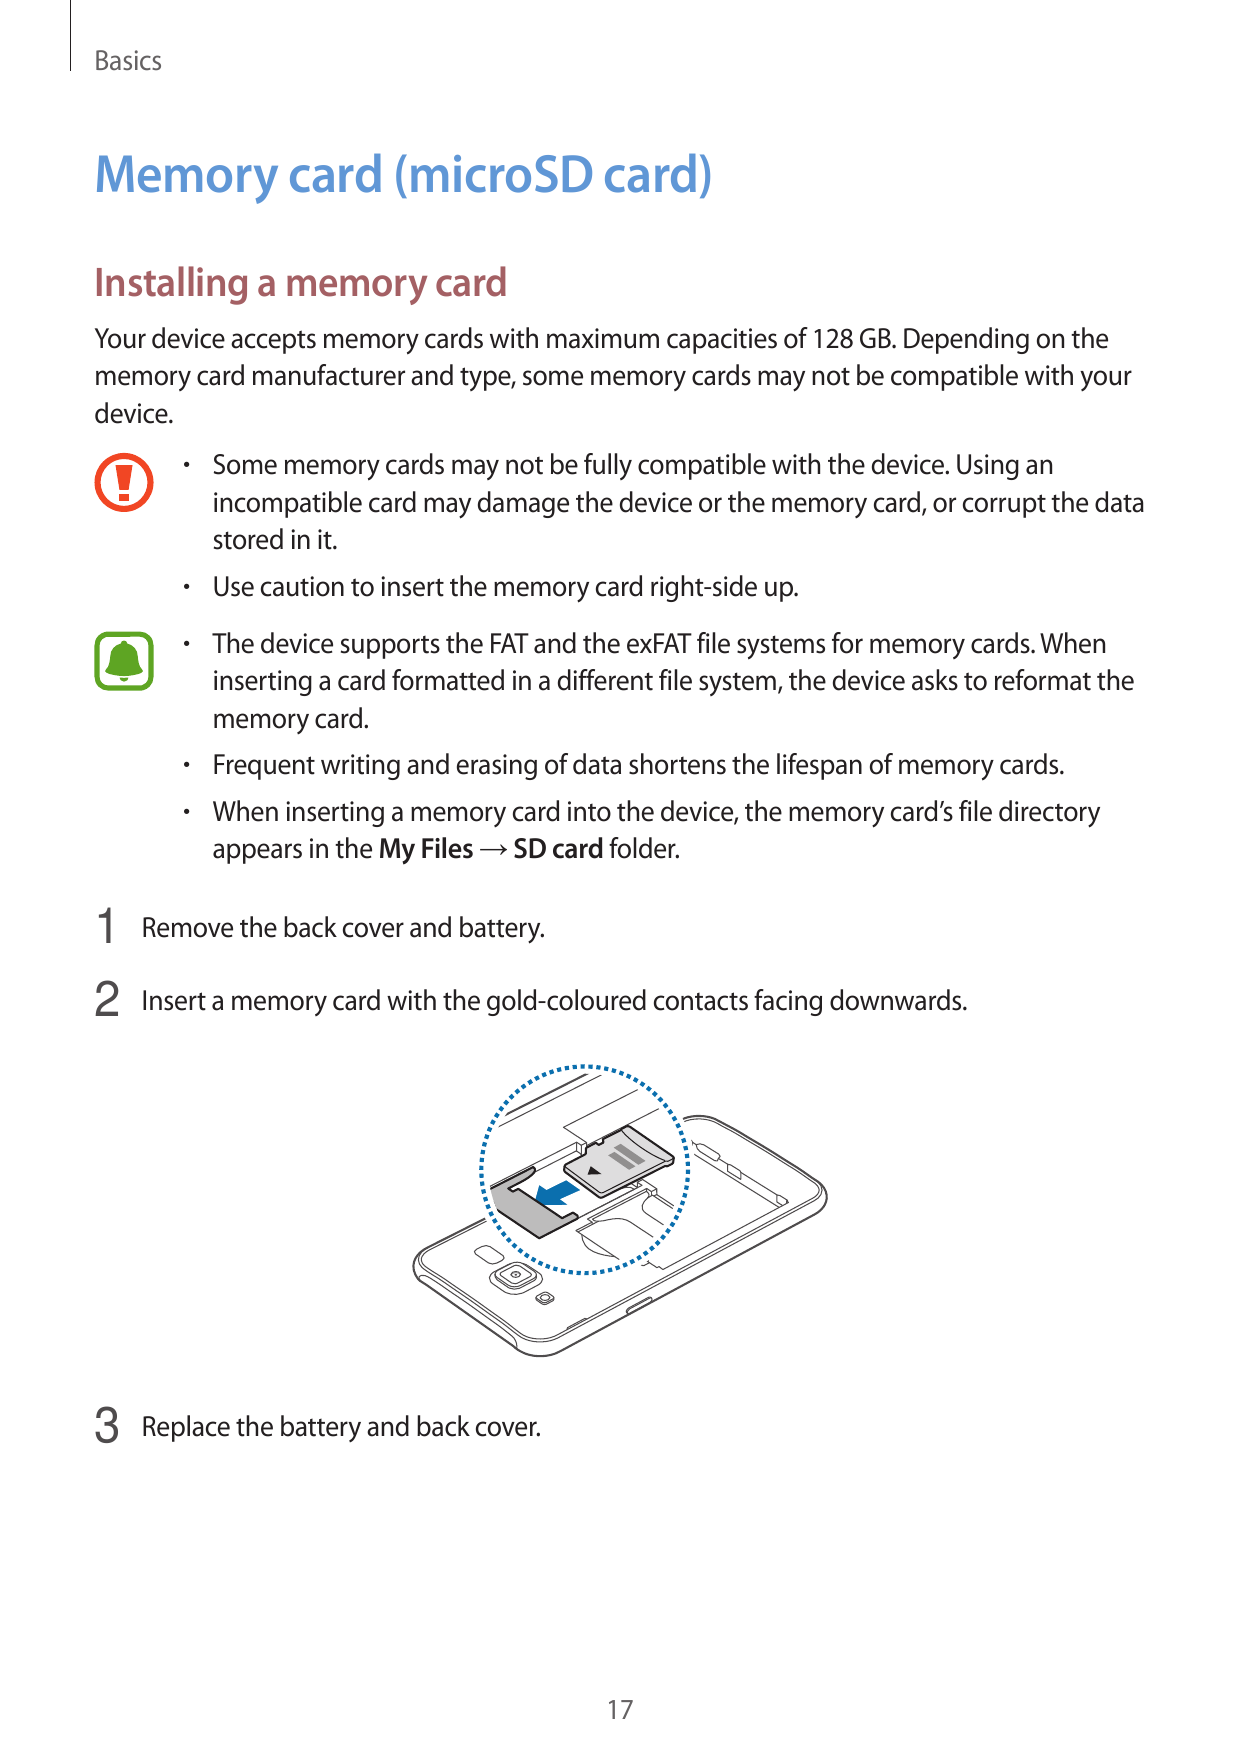 BasicsMemory card (microSD card)Installing a memory cardYour device accepts memory cards with maximum capacities of 128 GB. Depe